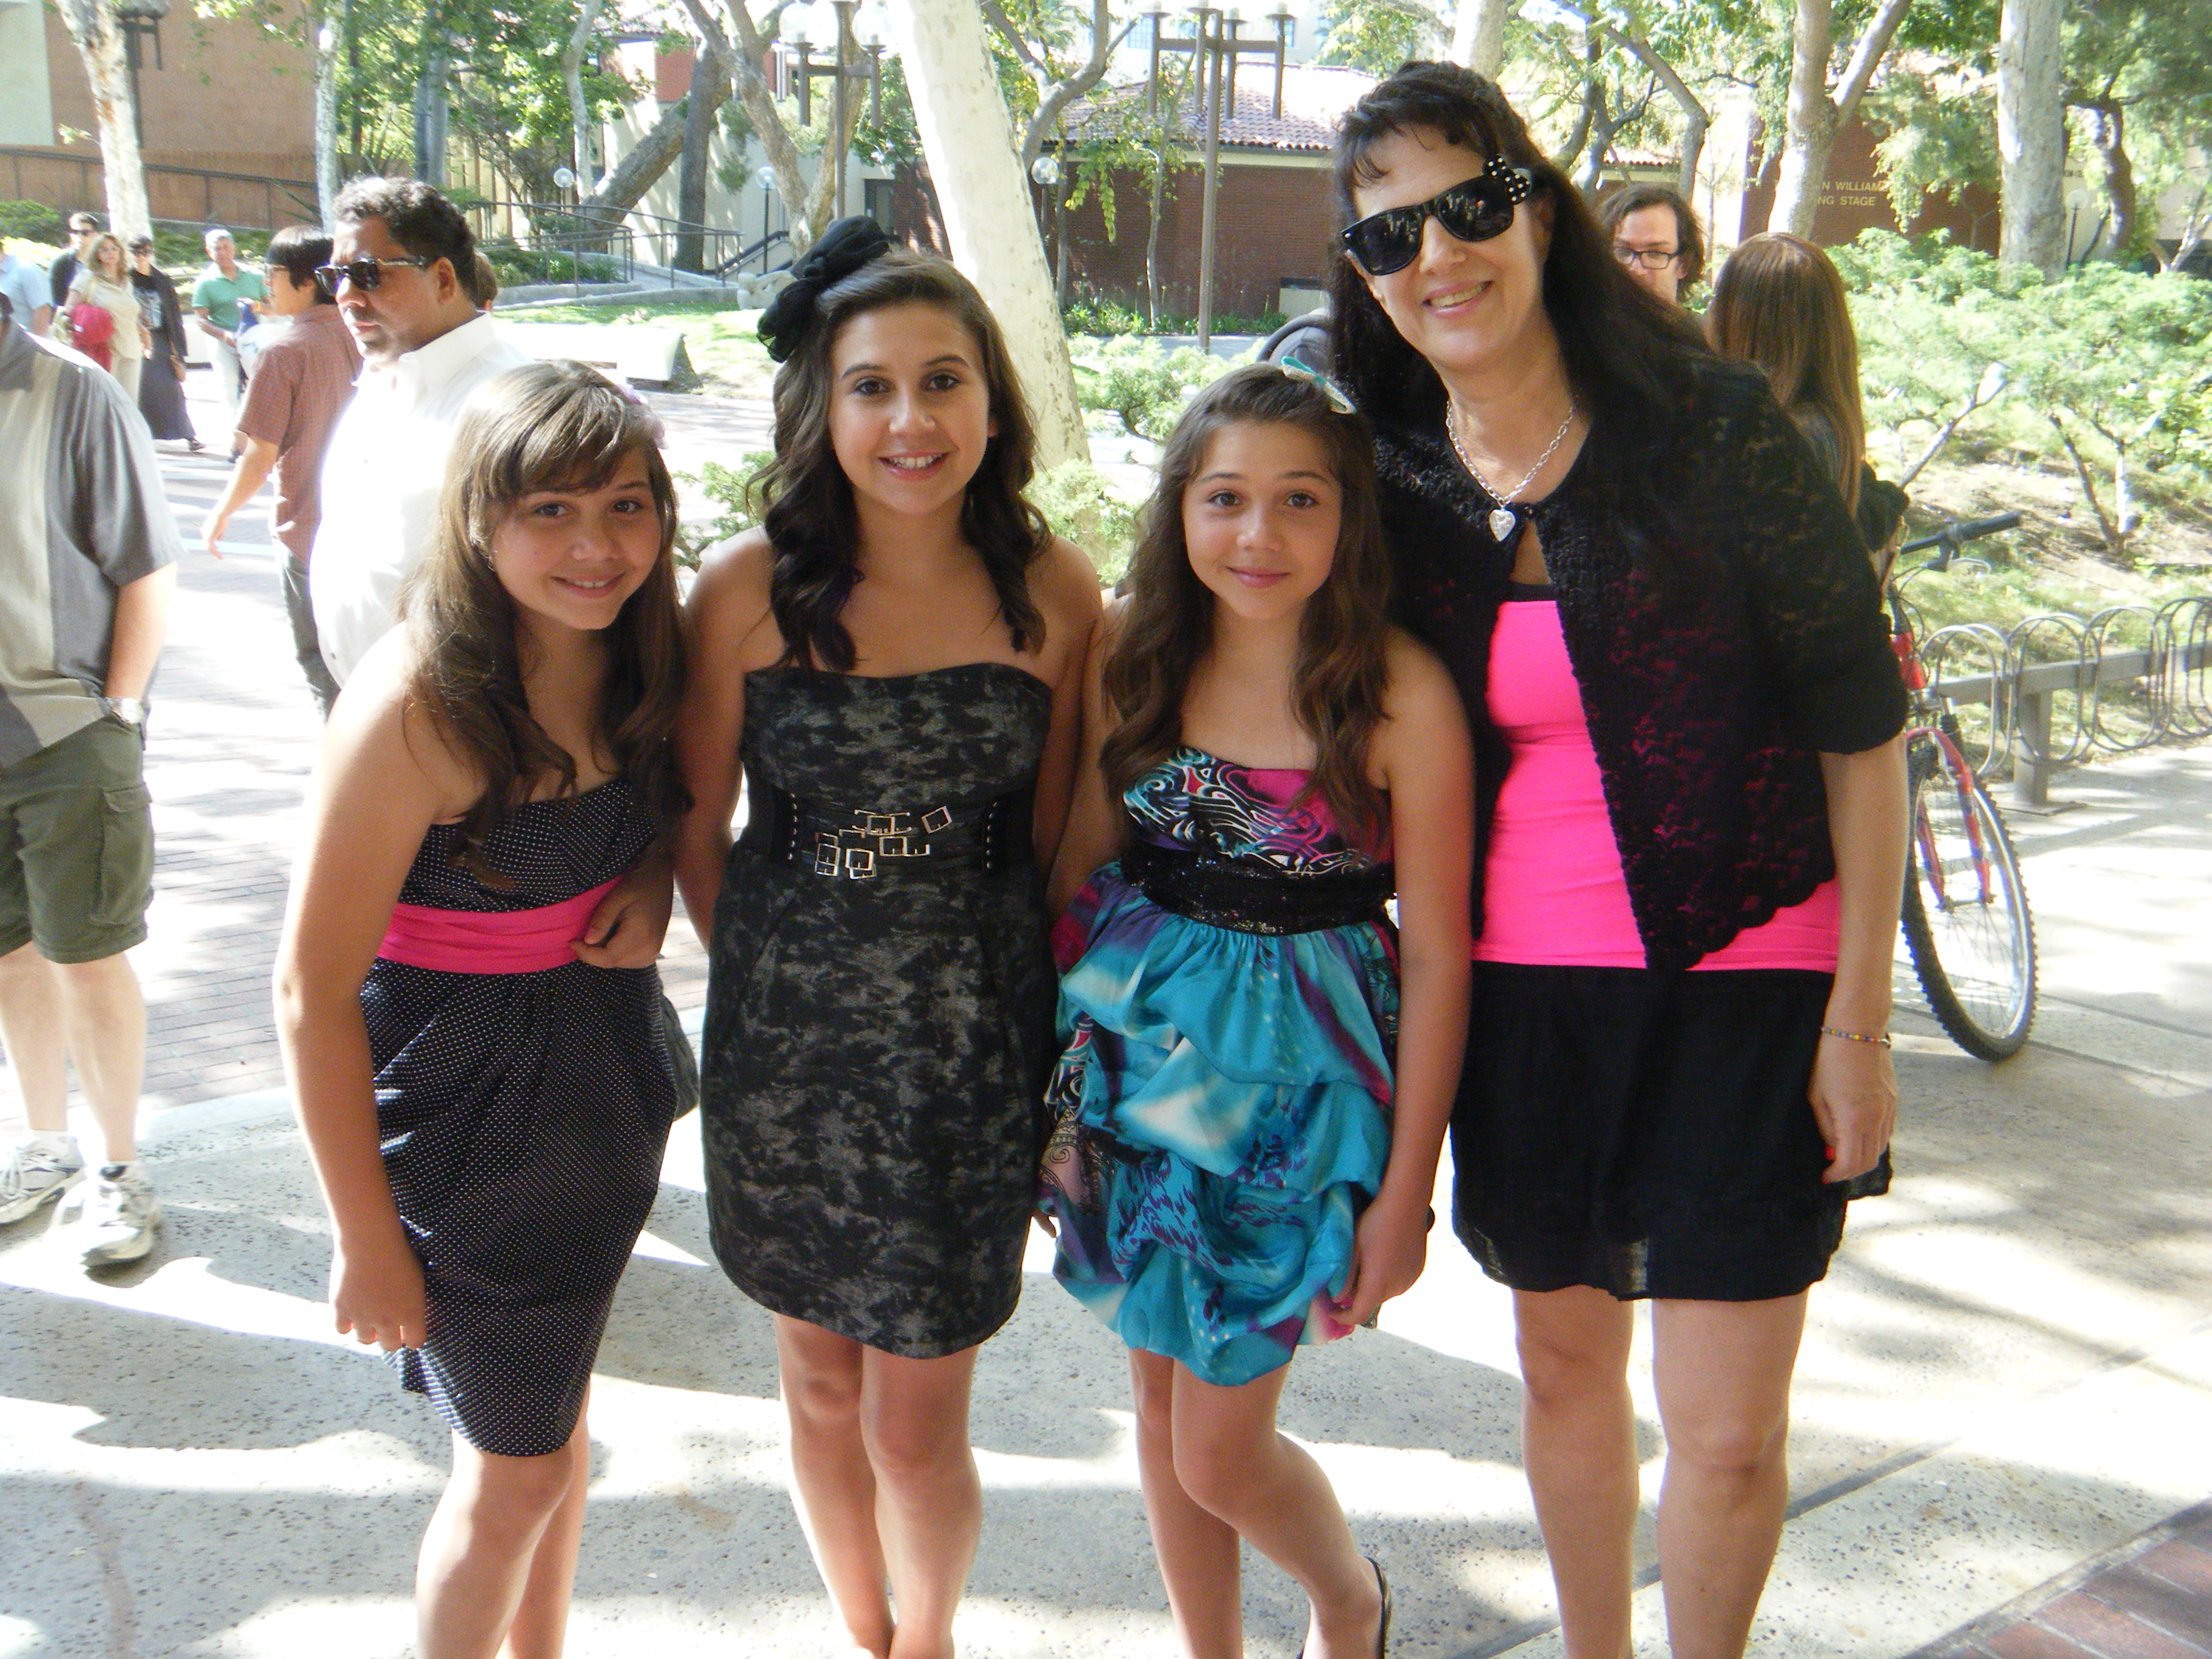 Brittni Luv, SAG-AFTRA, USC Movie Premiere Event with Casting Director, Cheryl Faye, and twin sisters, Chelsea & Brooke